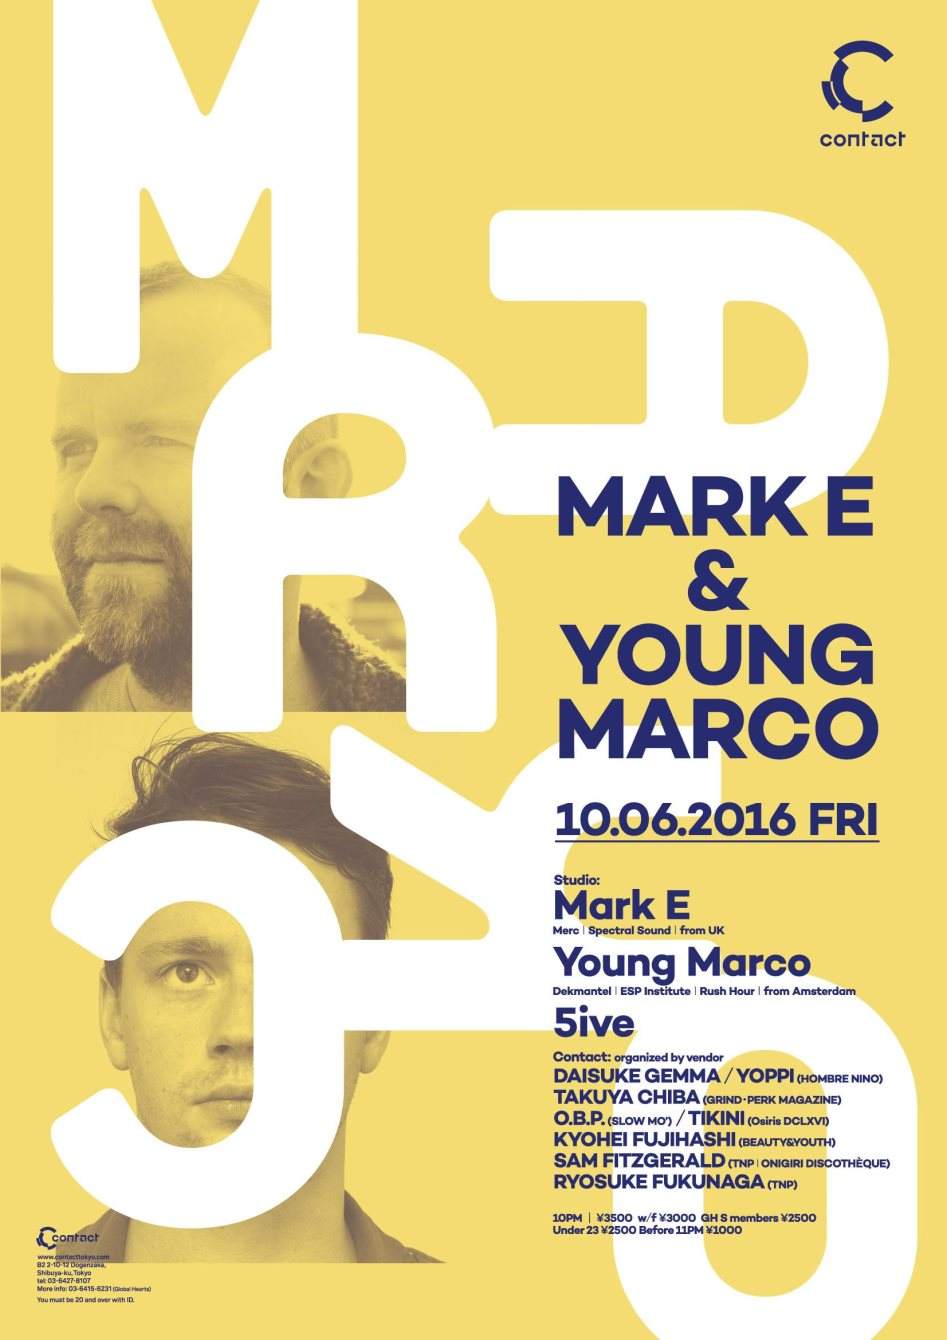 Mark E, Young Marco - フライヤー表